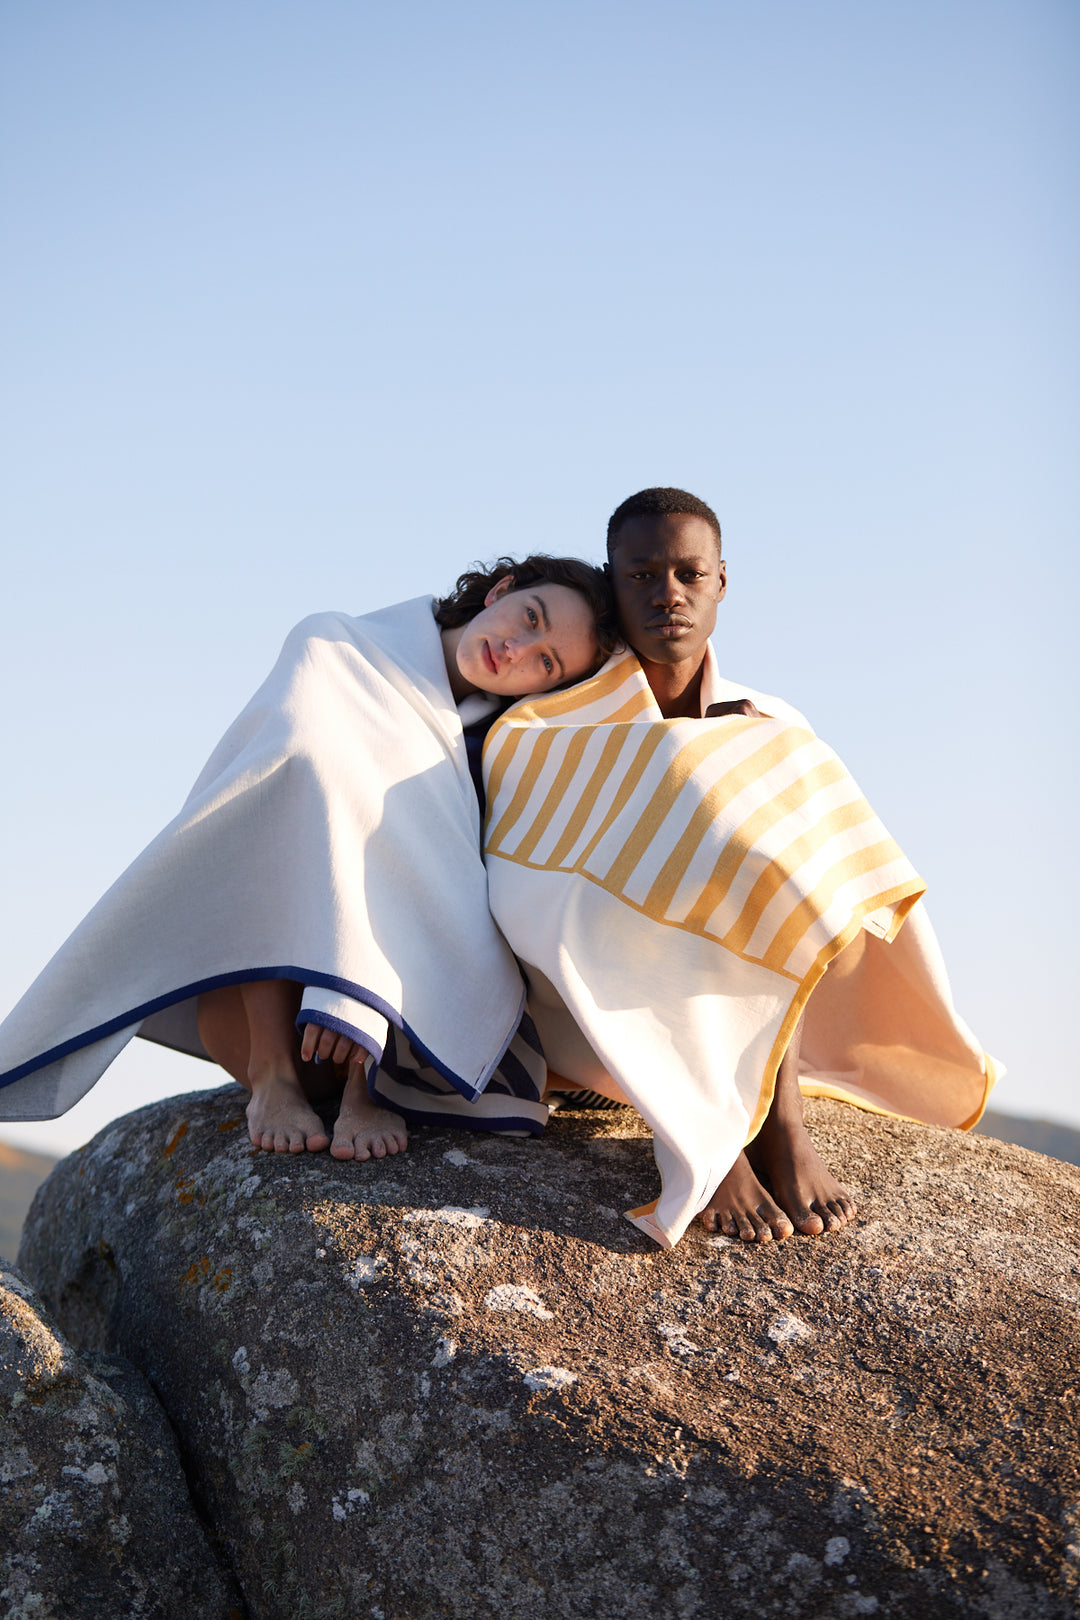 Girl and boy covering themselves with the Tucca Florida and Danai beach towels styles. Sitting on a rock in the beach. Holding both Tucca towels, beach towels that doesn't get blown by the wind. Super soft texture as it is made with 100% organic cotton.